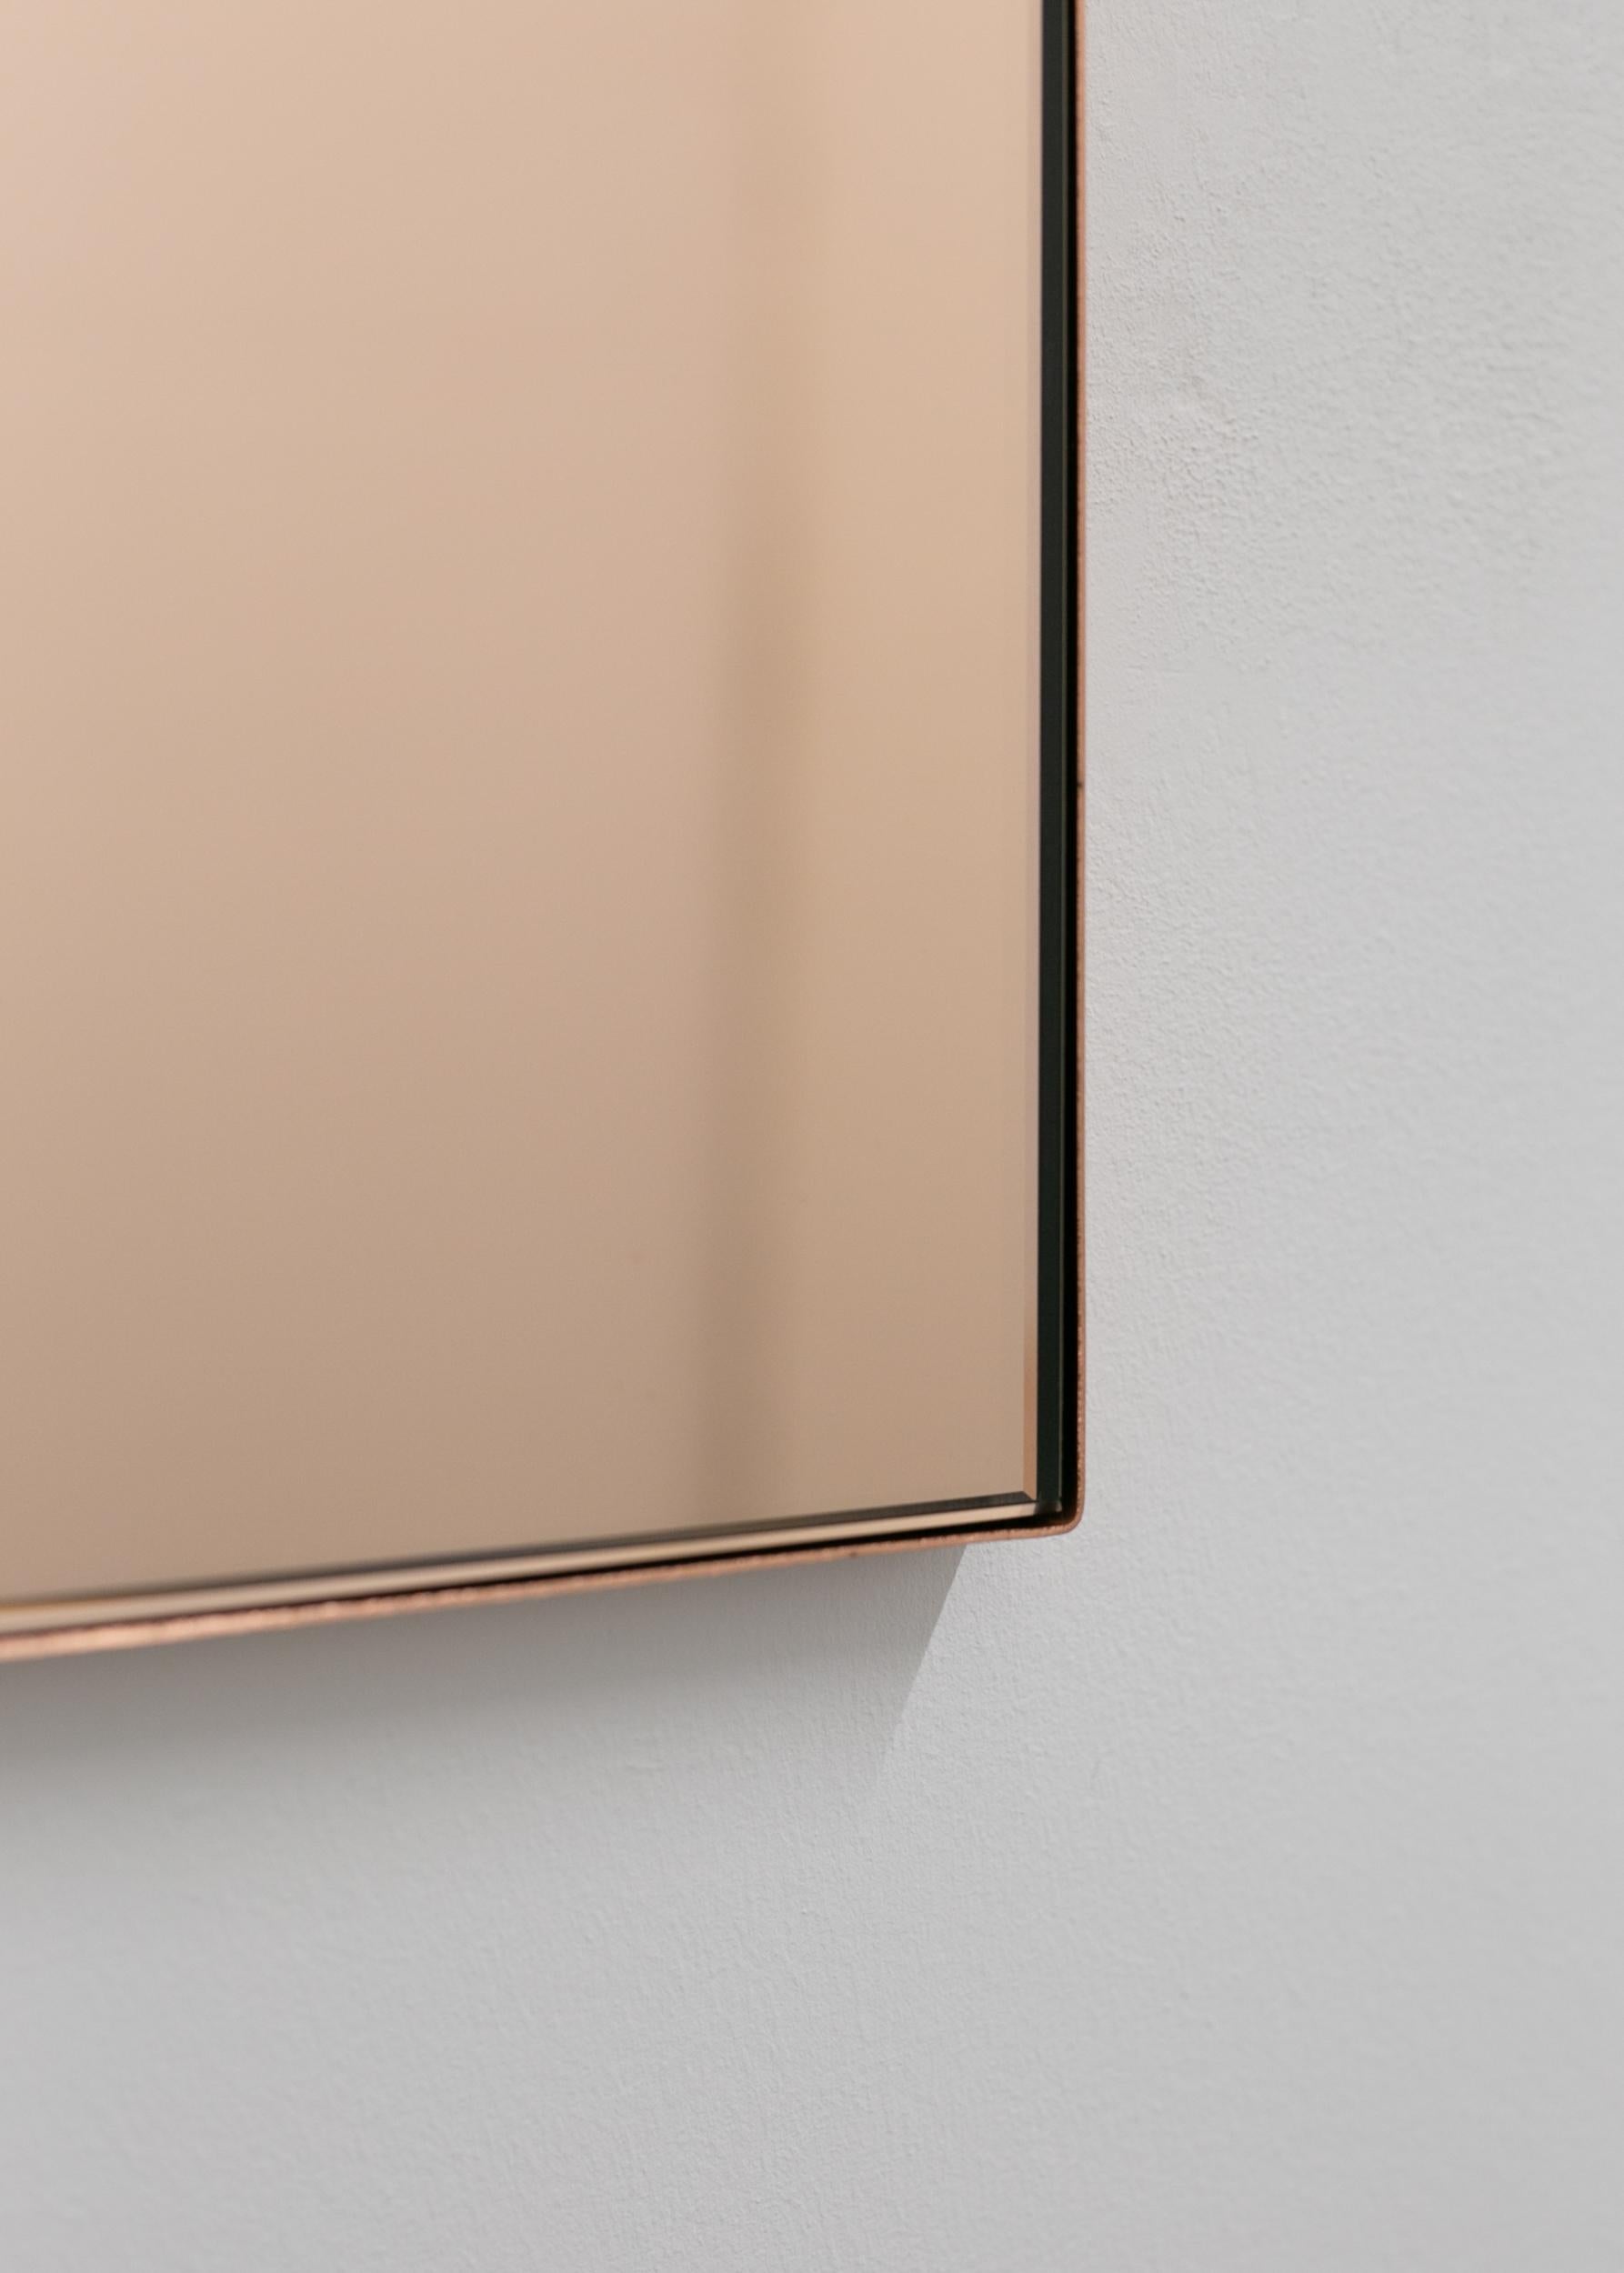 Contemporary Arcus Arched Rose Gold Modern Wall Mirror with Copper Frame, XL For Sale